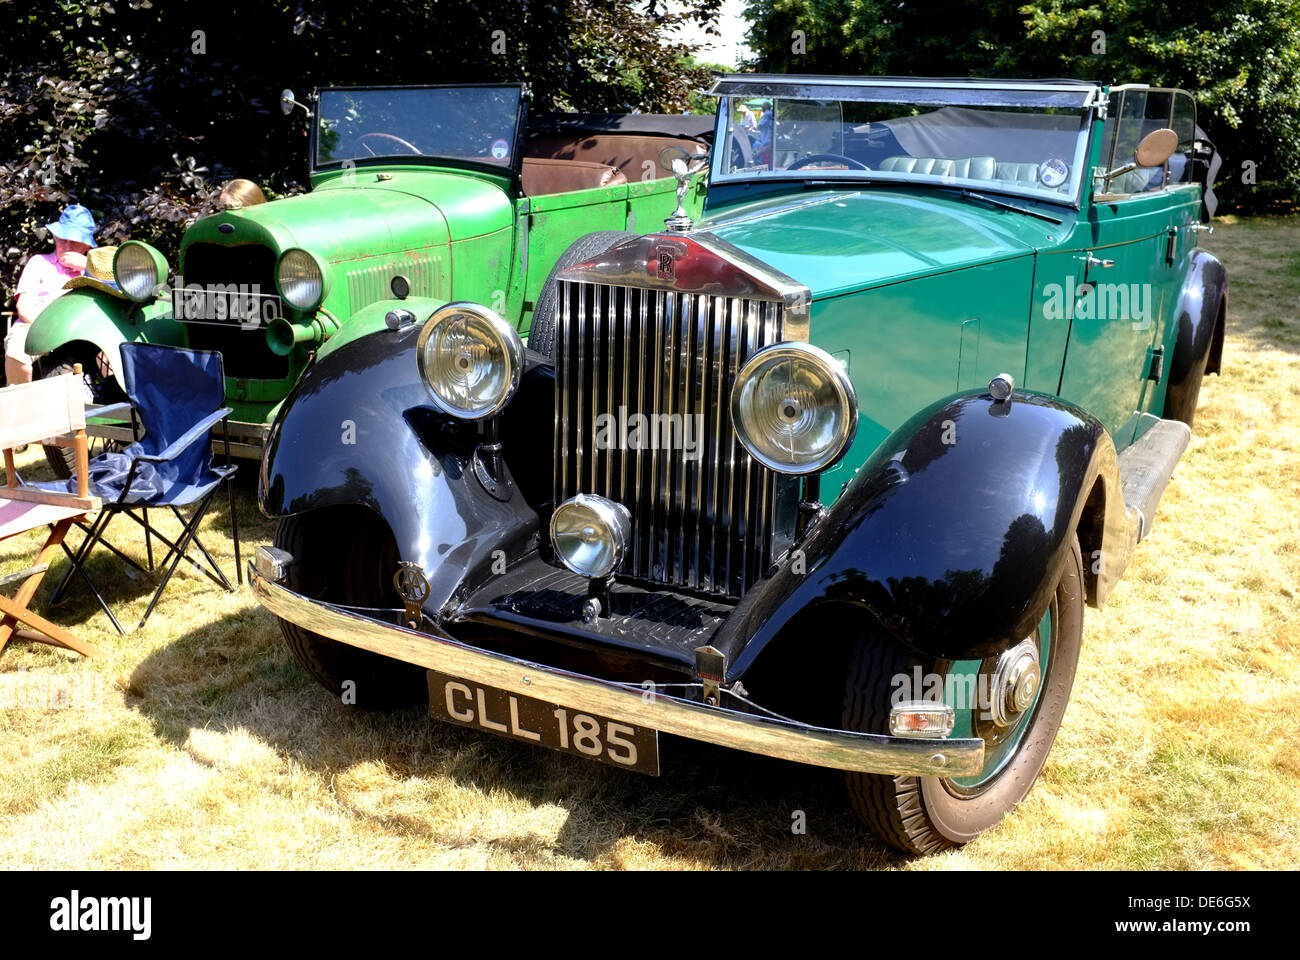 Perfect Rolls Royce and ratty Ford Model A classic cars parked together at a picnic Stock Photo